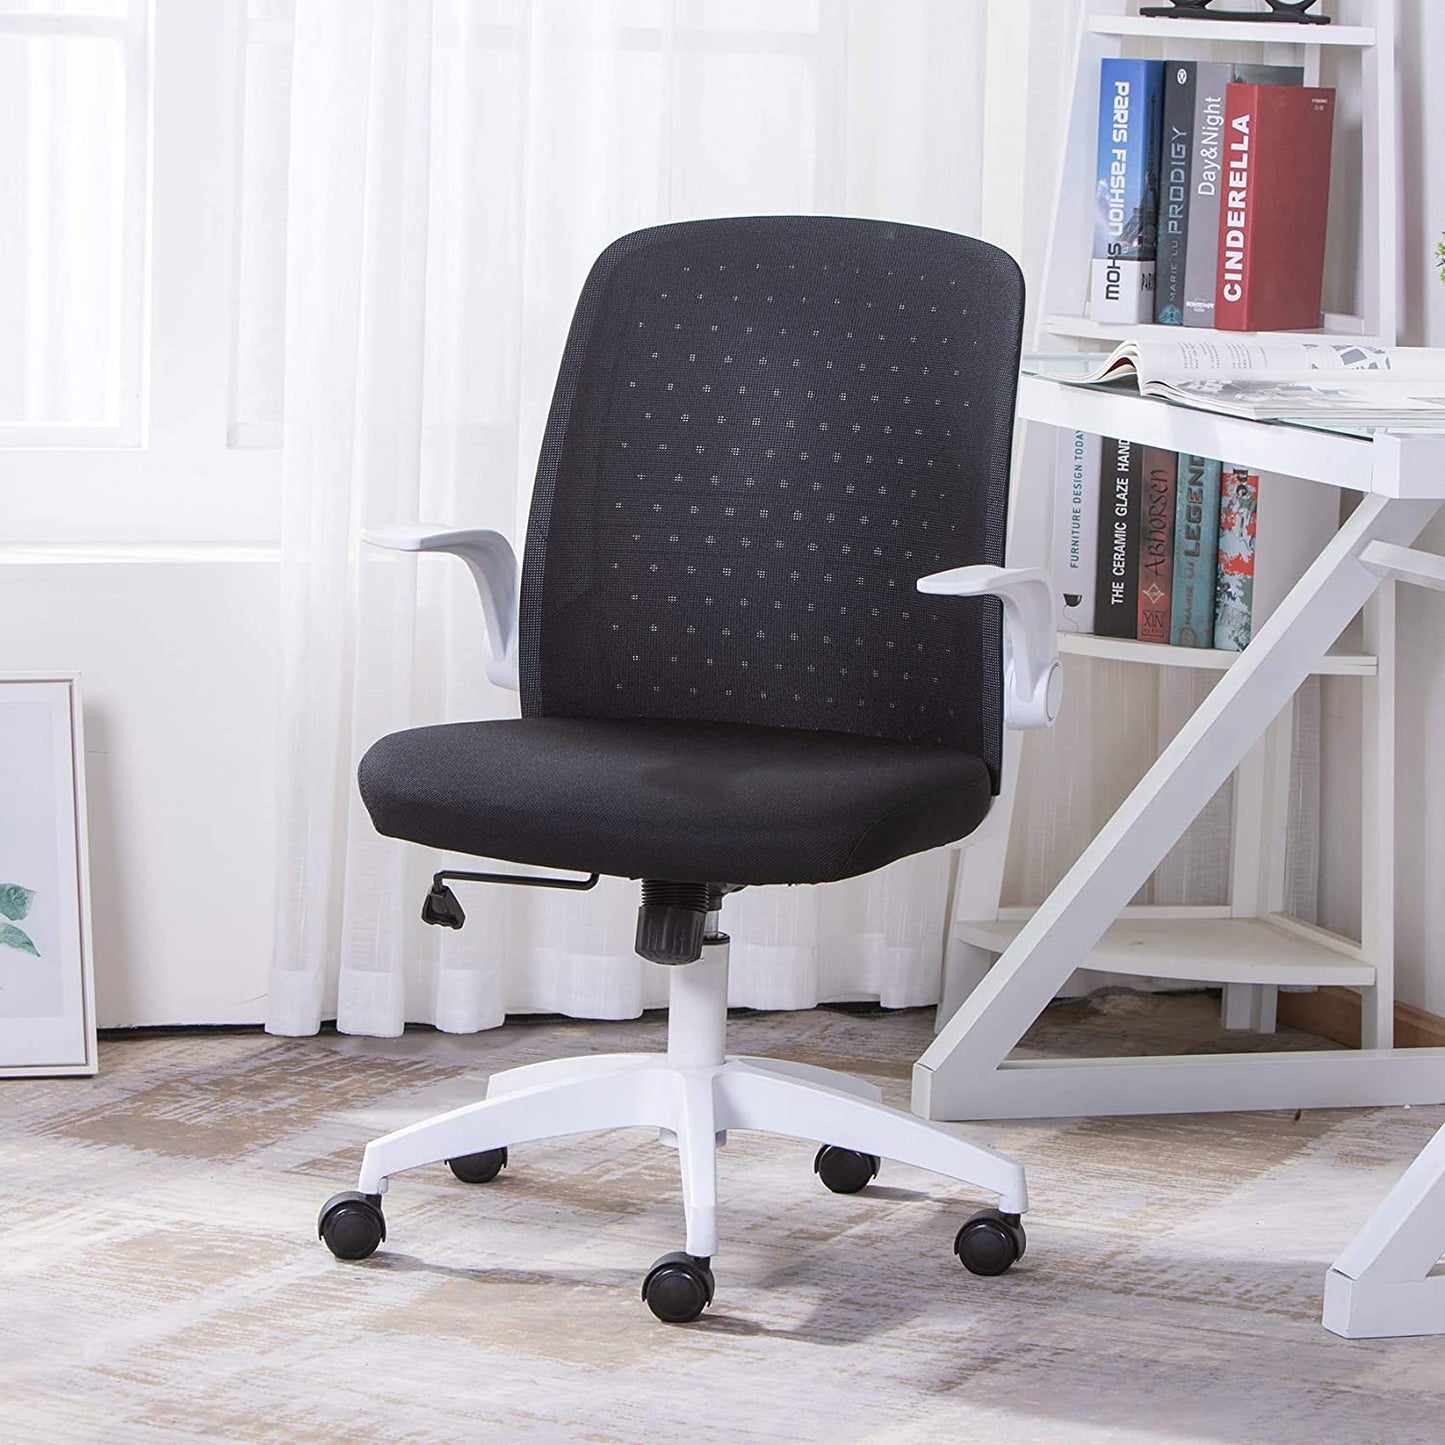 UNICOO - Office Chair Ergonomic Mid Back Swivel Chair, Mesh Computer Chair, Office Task Desk Chair, Home Comfort Chairs with Flip-up Armrests (W-179B - White)